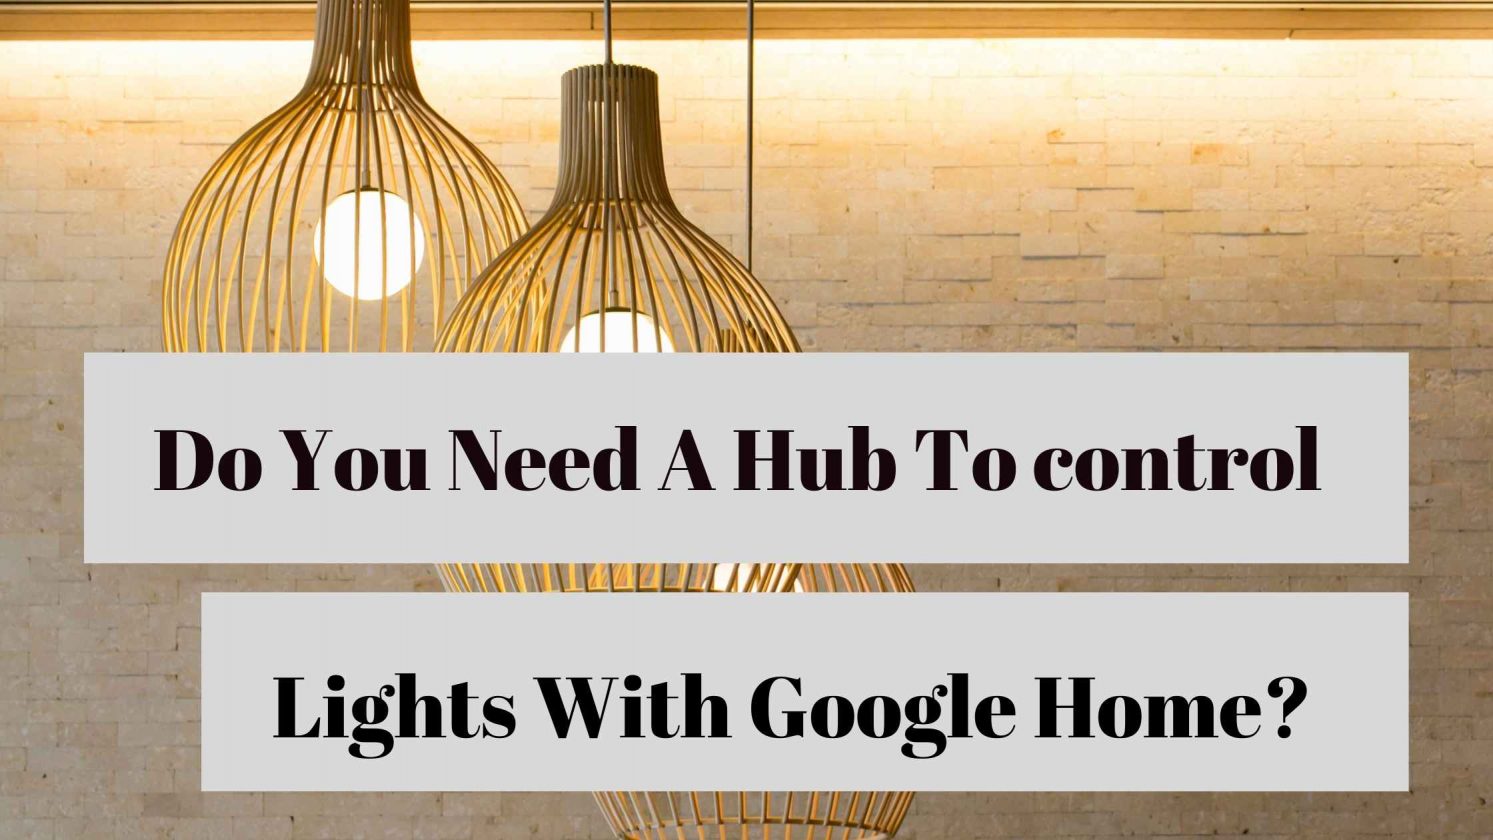 Do You Need A Hub To control Lights With Google Home?